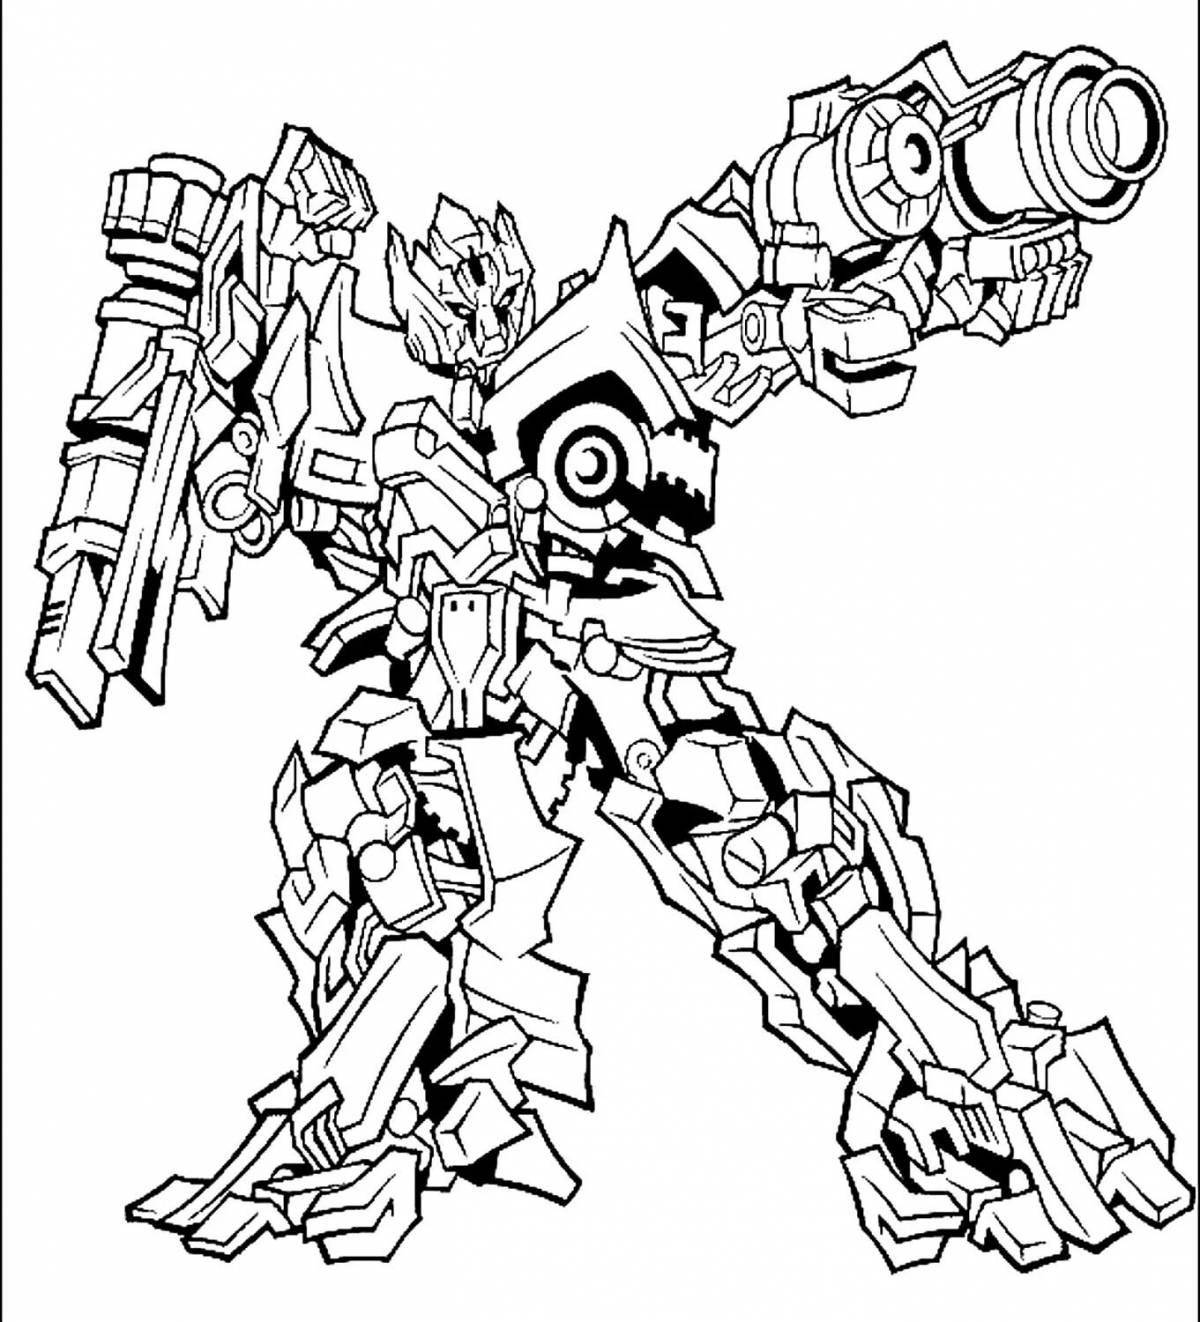 Gentle Ravager coloring page